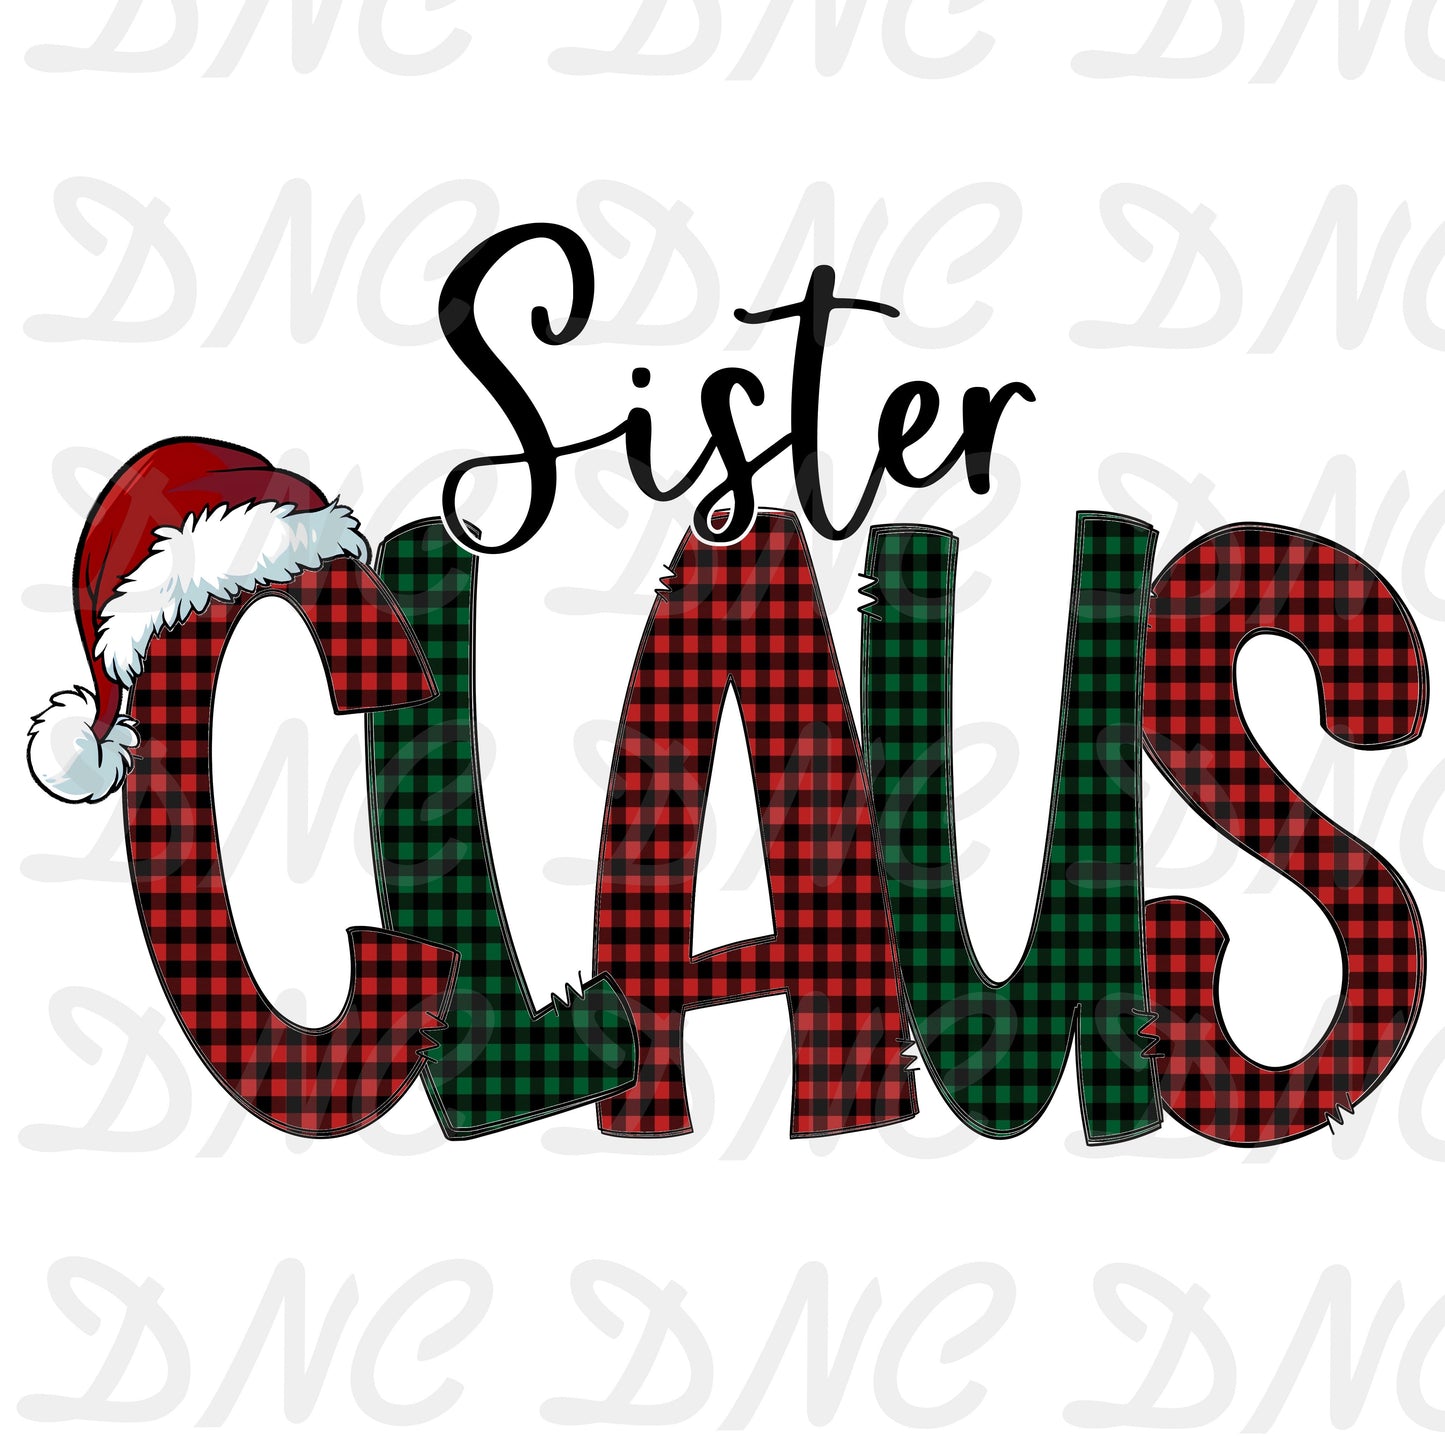 Sister claus red and green - Sublimation